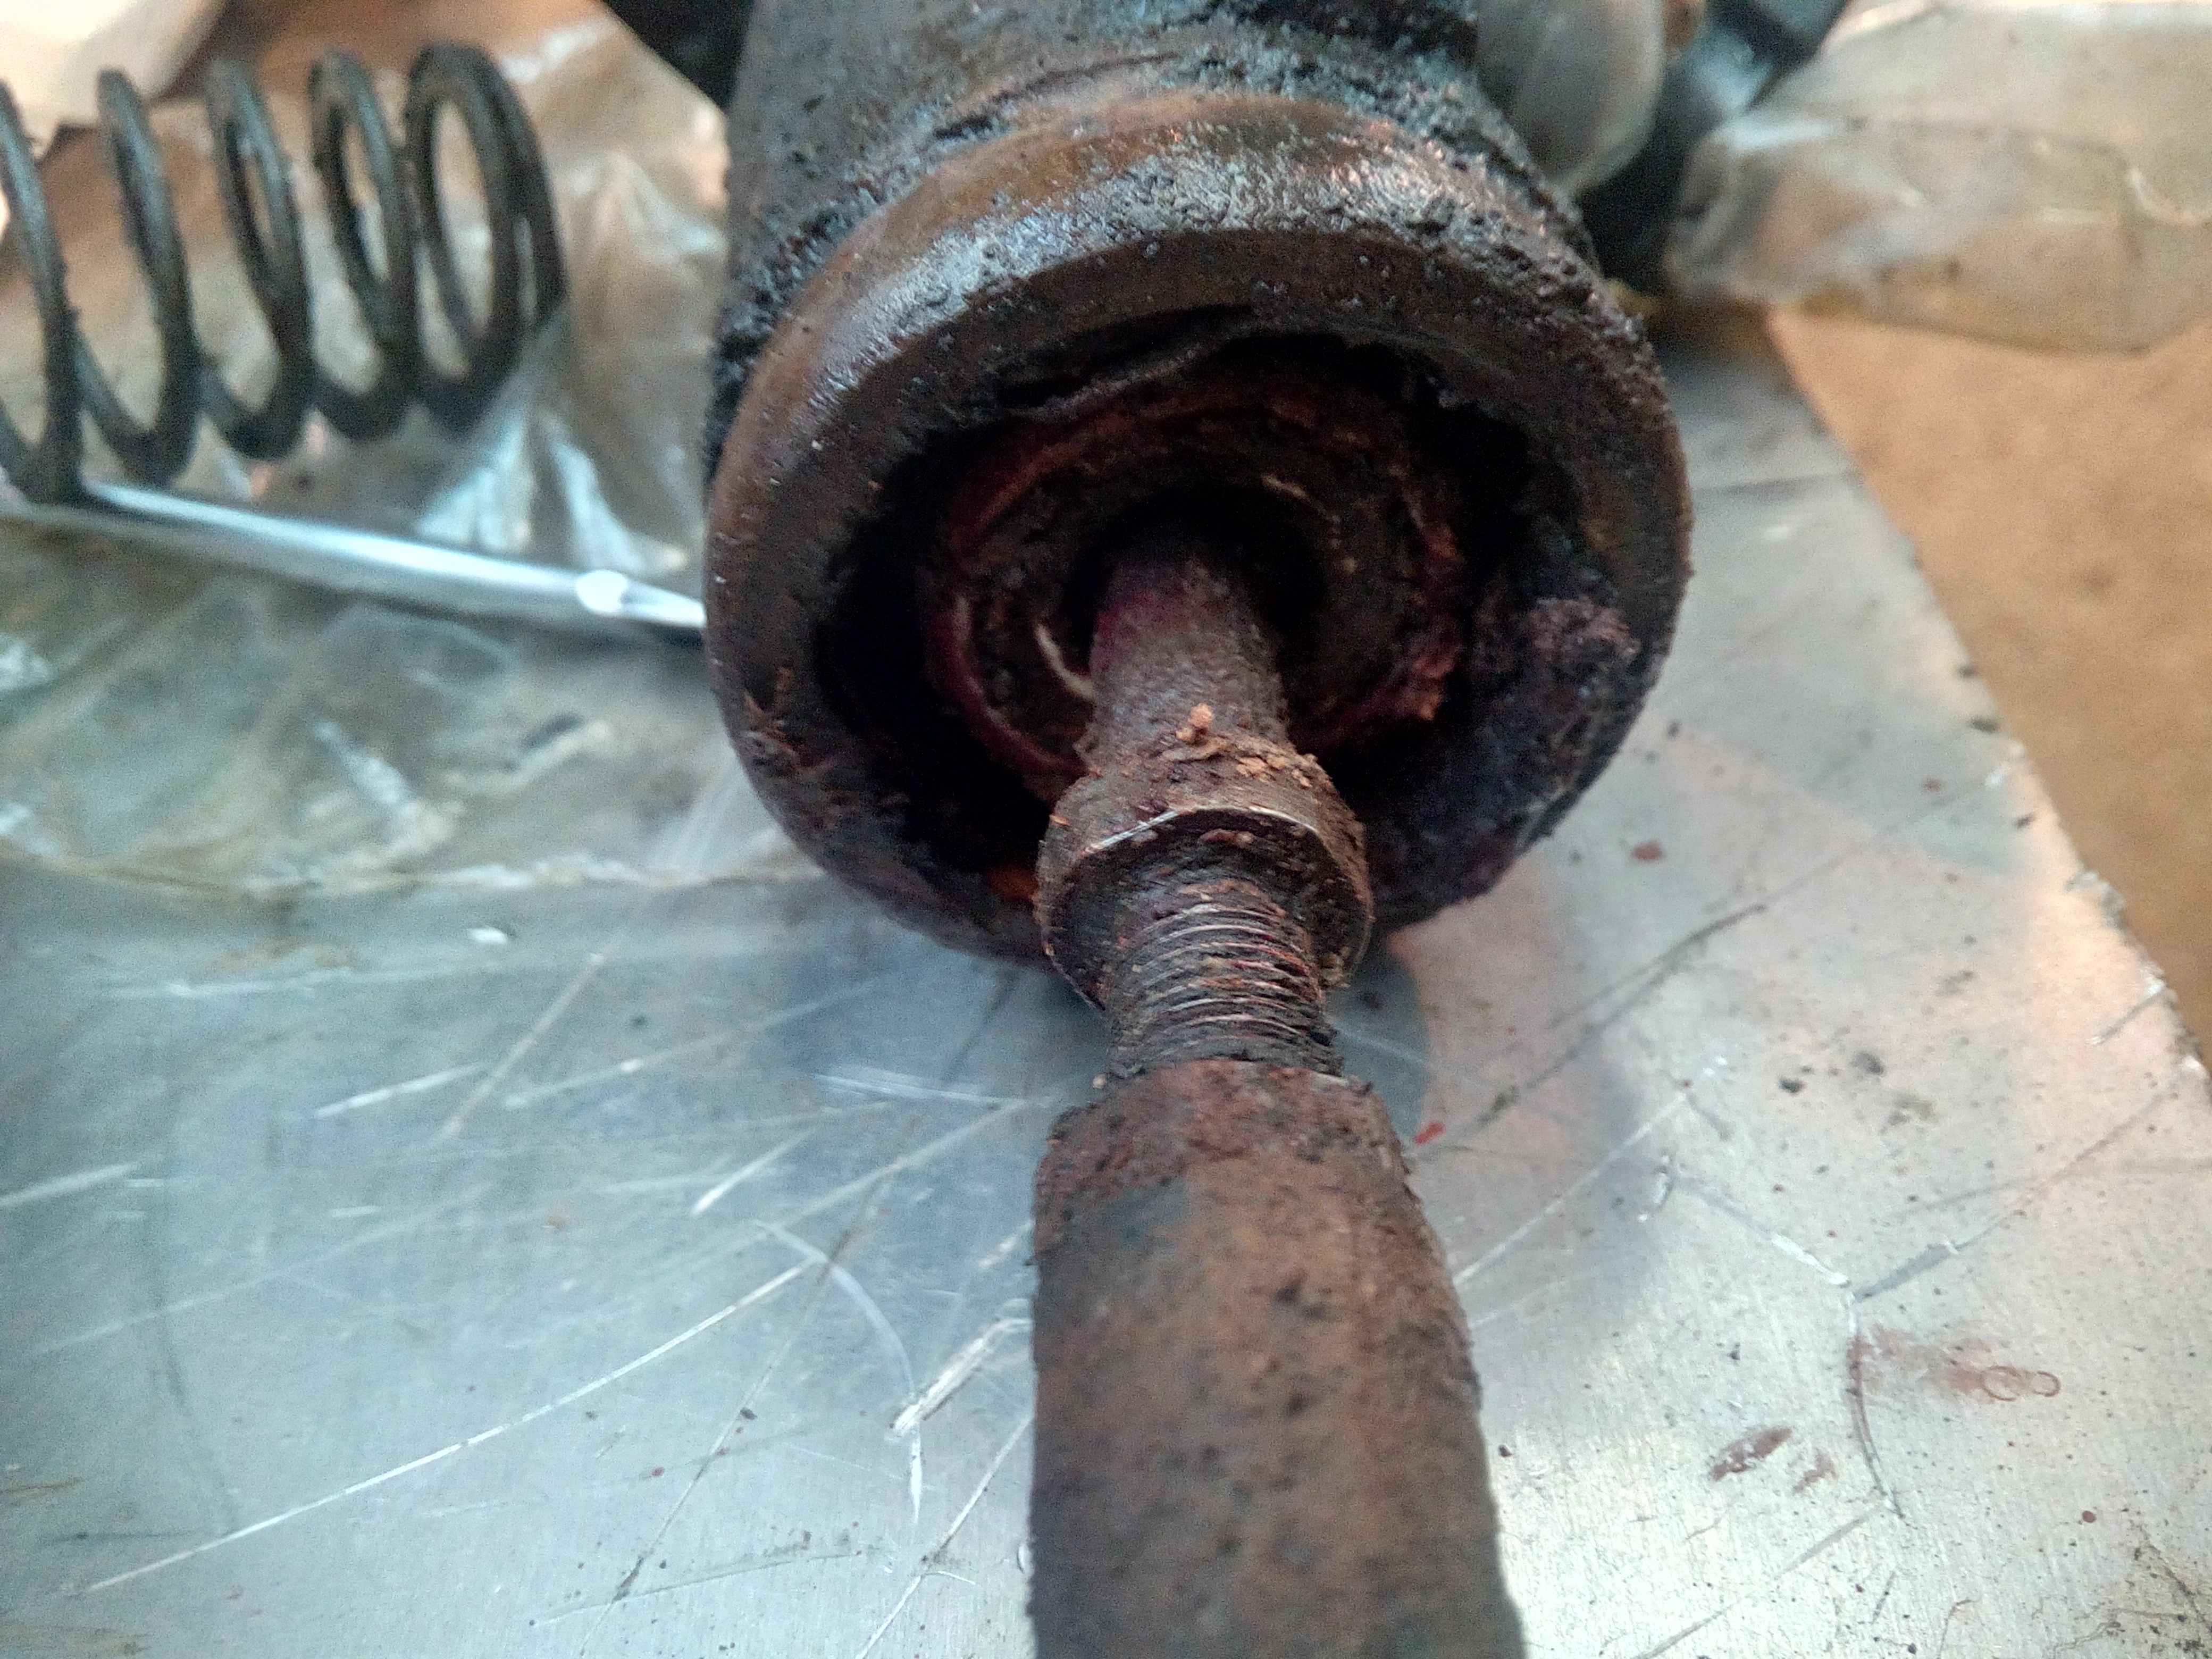 A photograph of the end of the rear brake actuator, showing a
horrible greasy rotten mess.